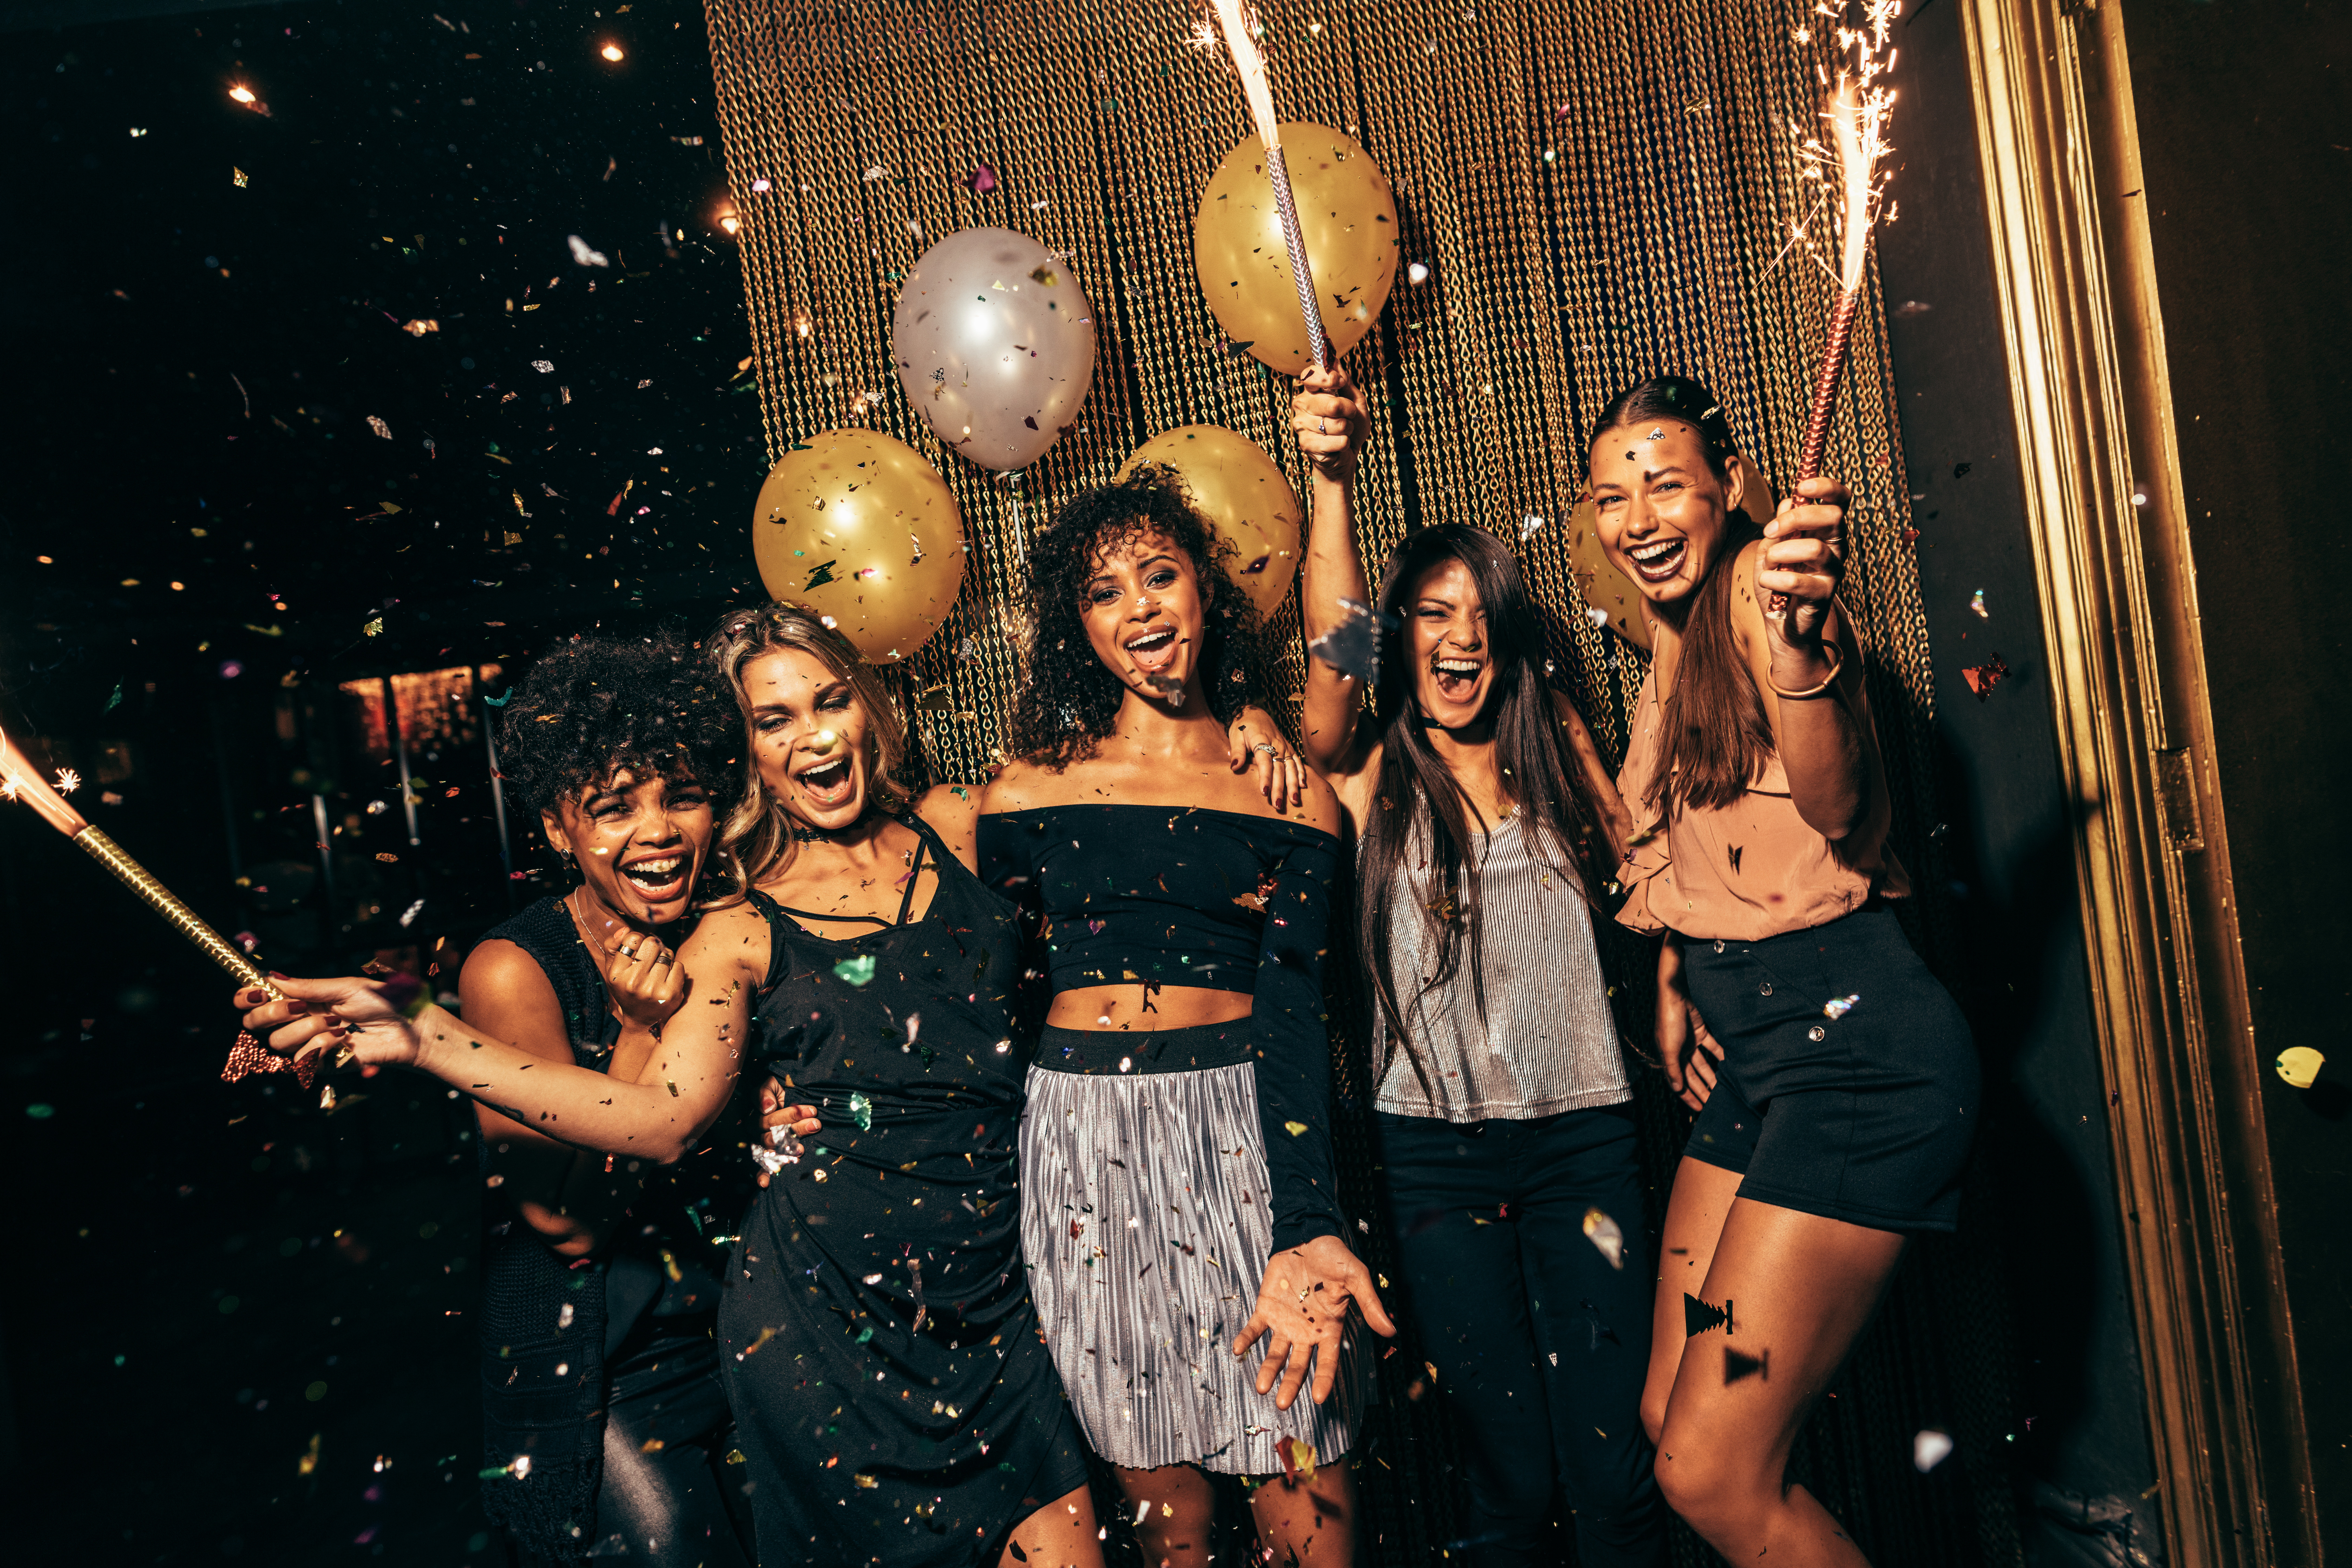 Group of ladies celebrating in club scene with sparklers